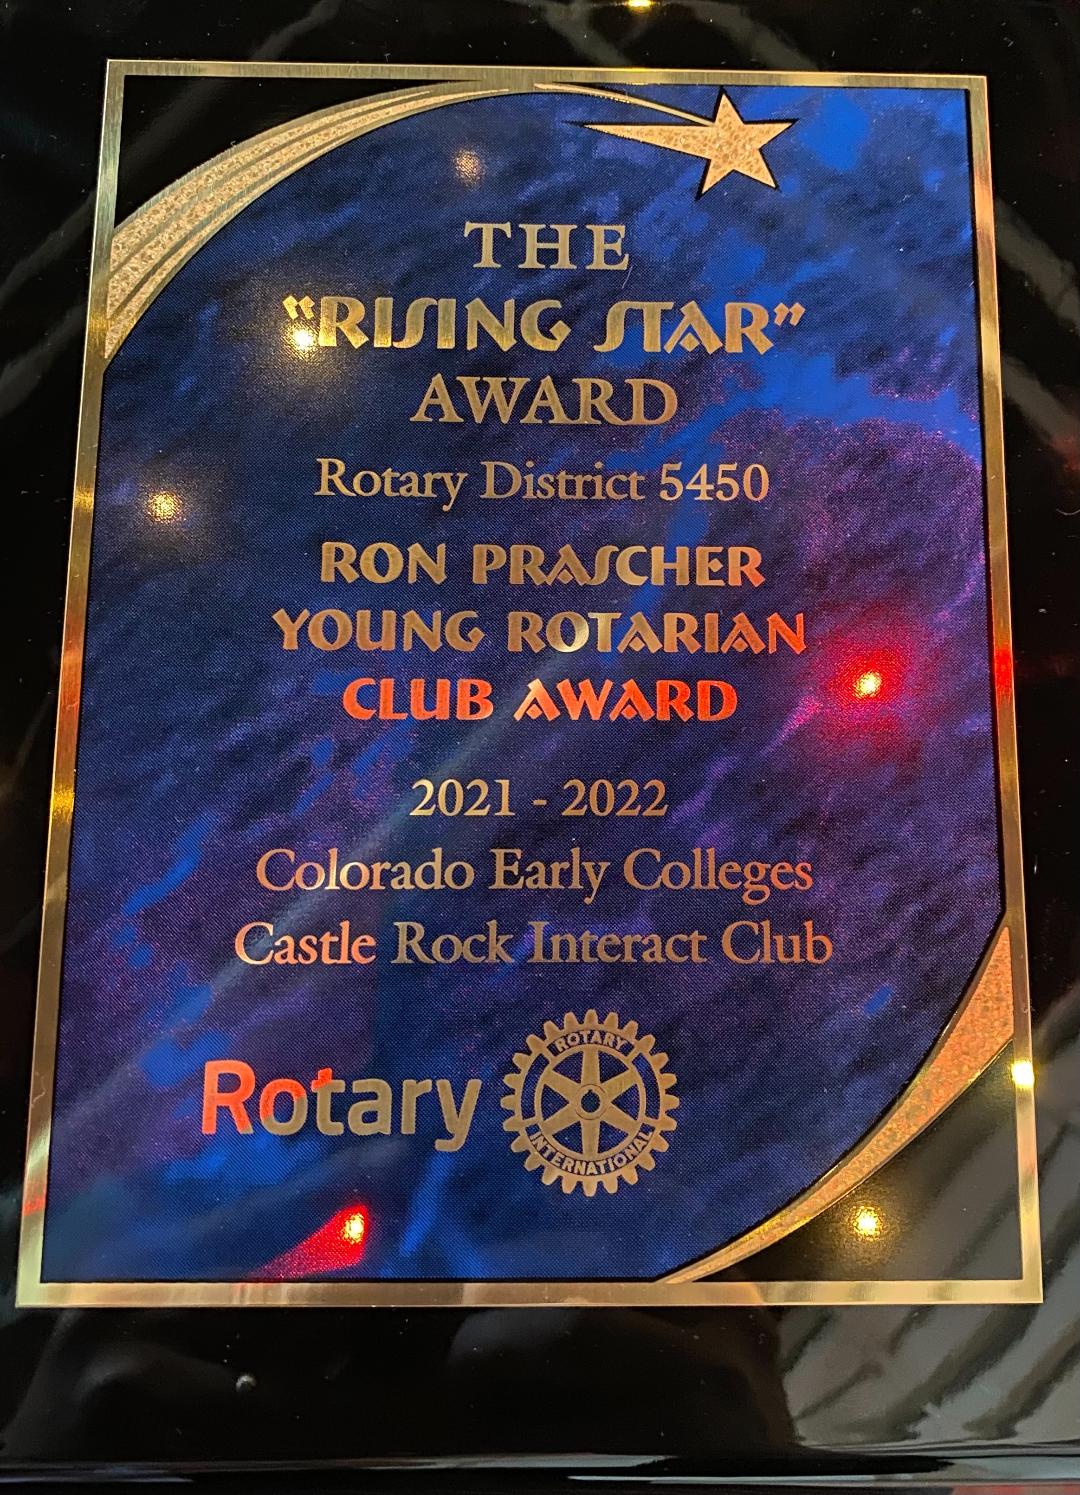 Congratulations to CEC Castle Rock Interact Club on Winning the “Ron Prascher Rising Star” Award for Their Exceptional Service Work!